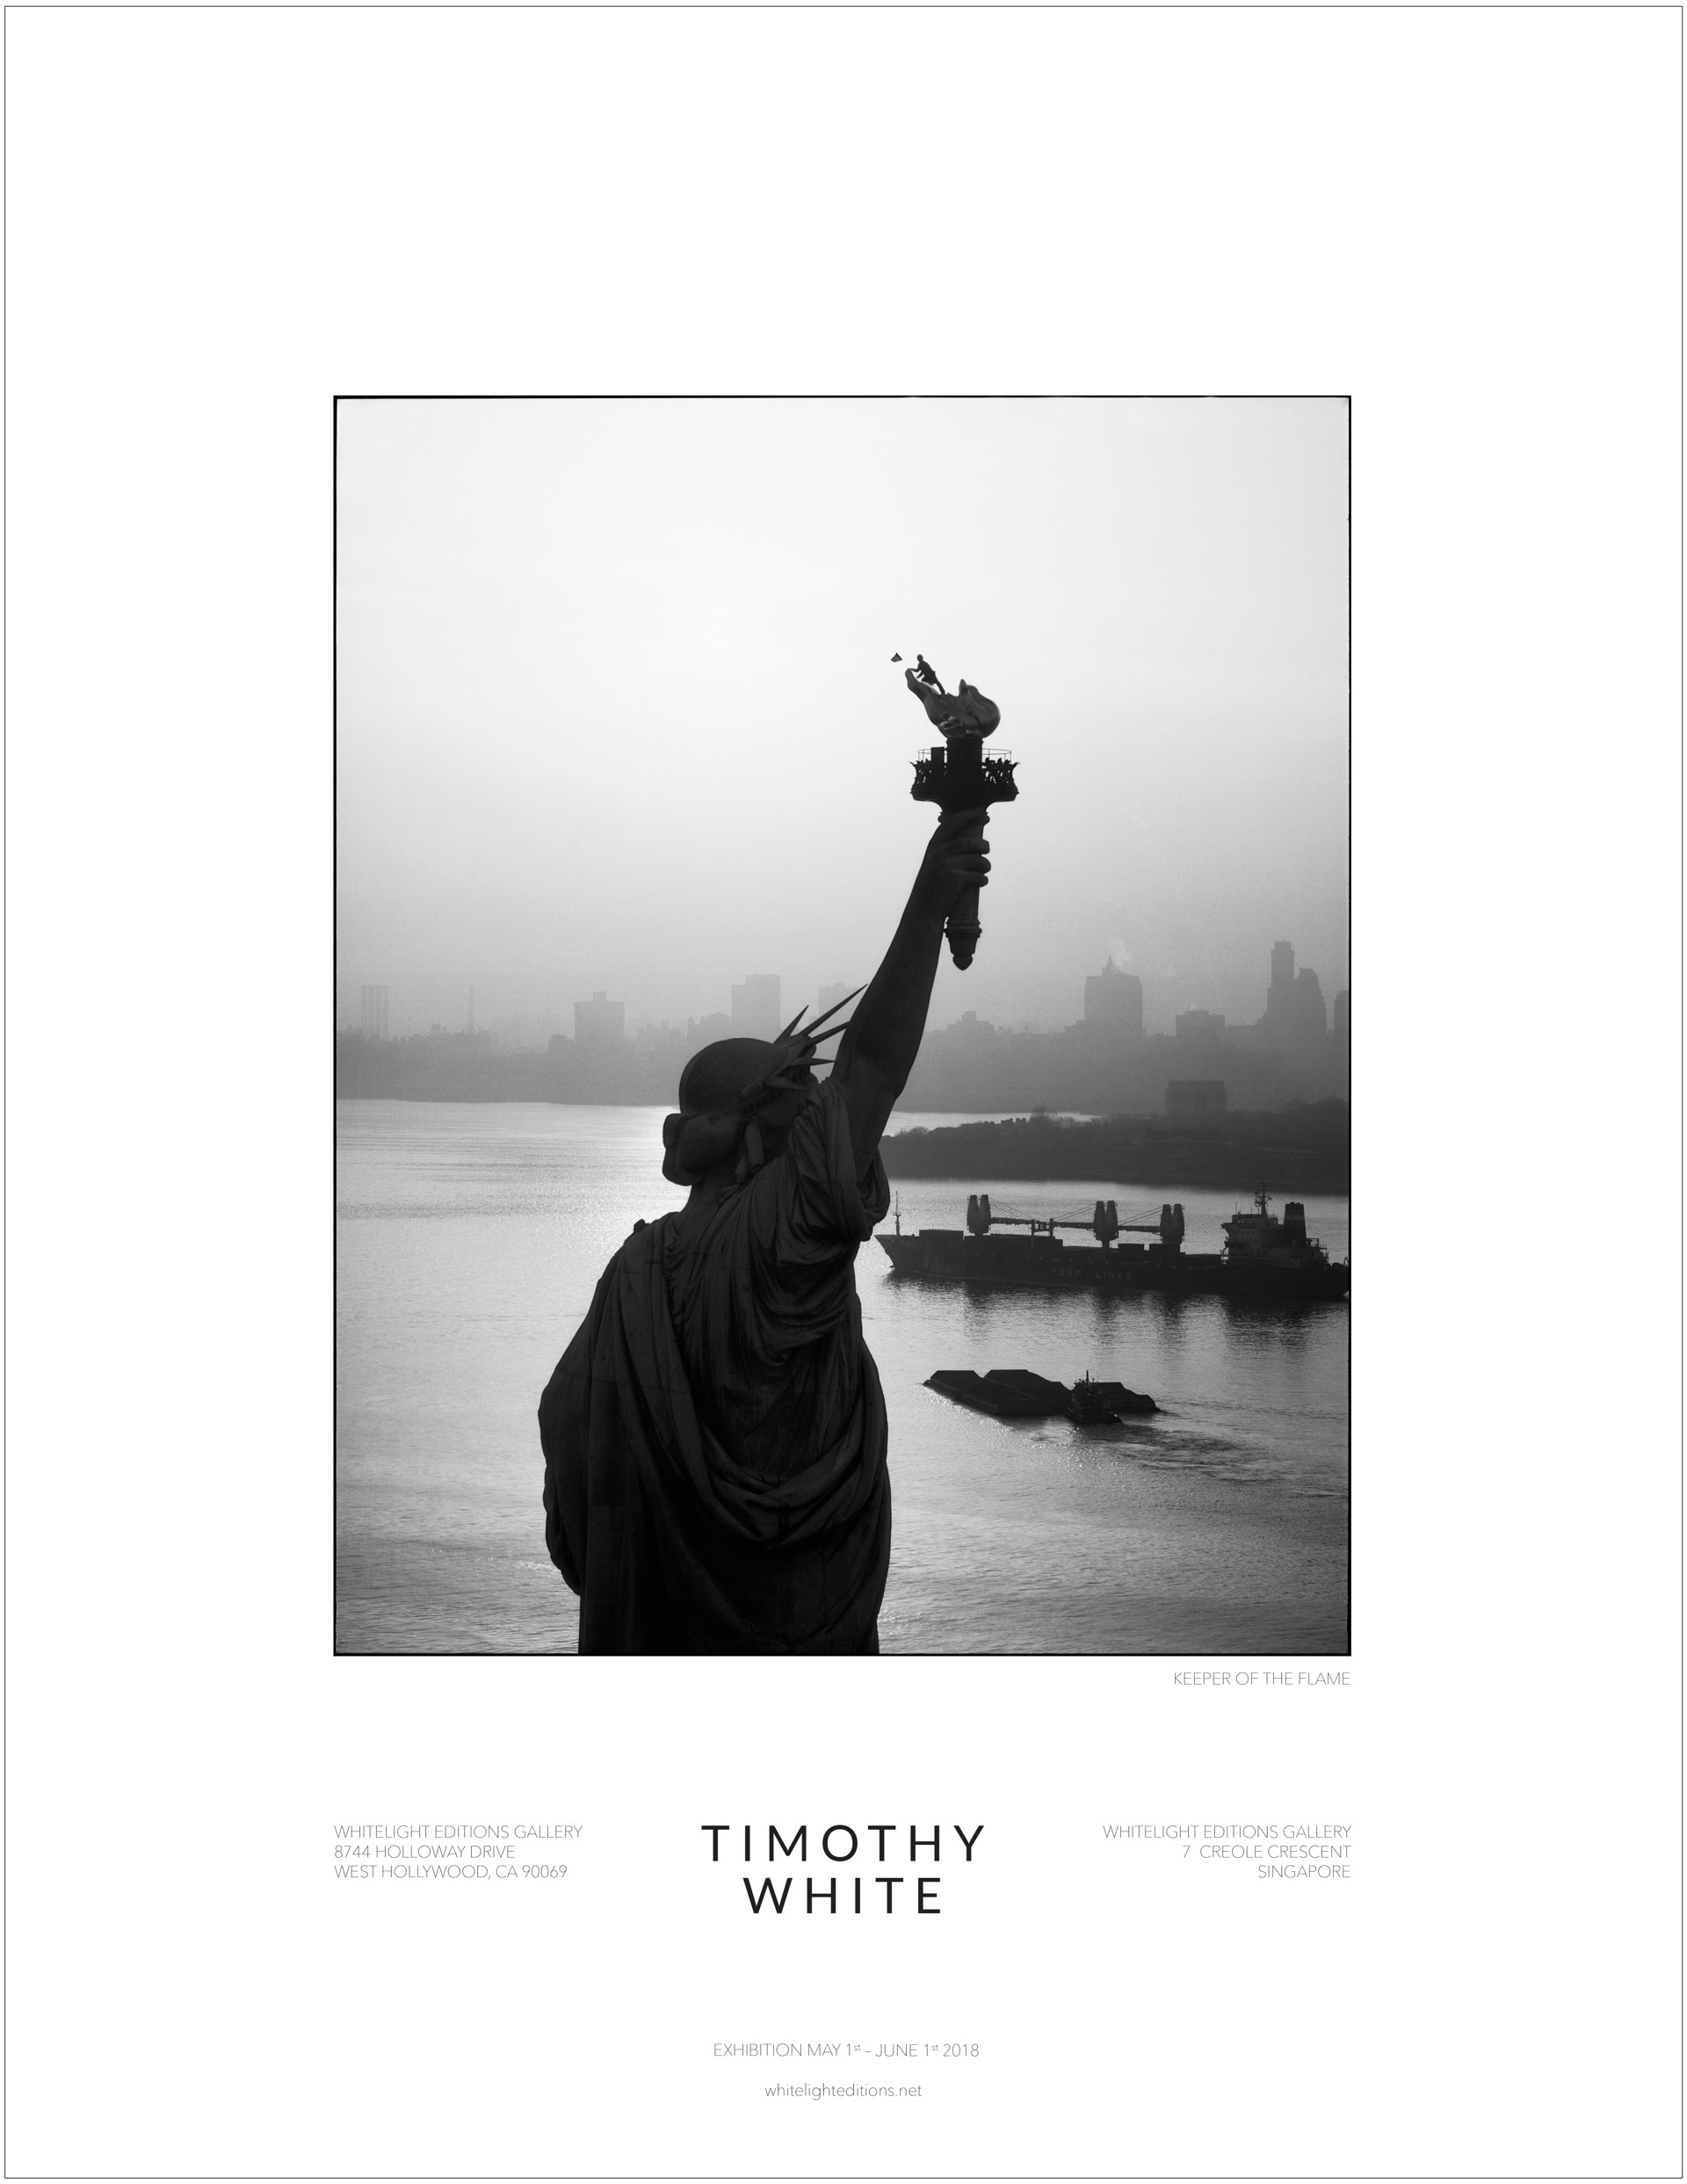 Keeper of the Flame by Timothy White